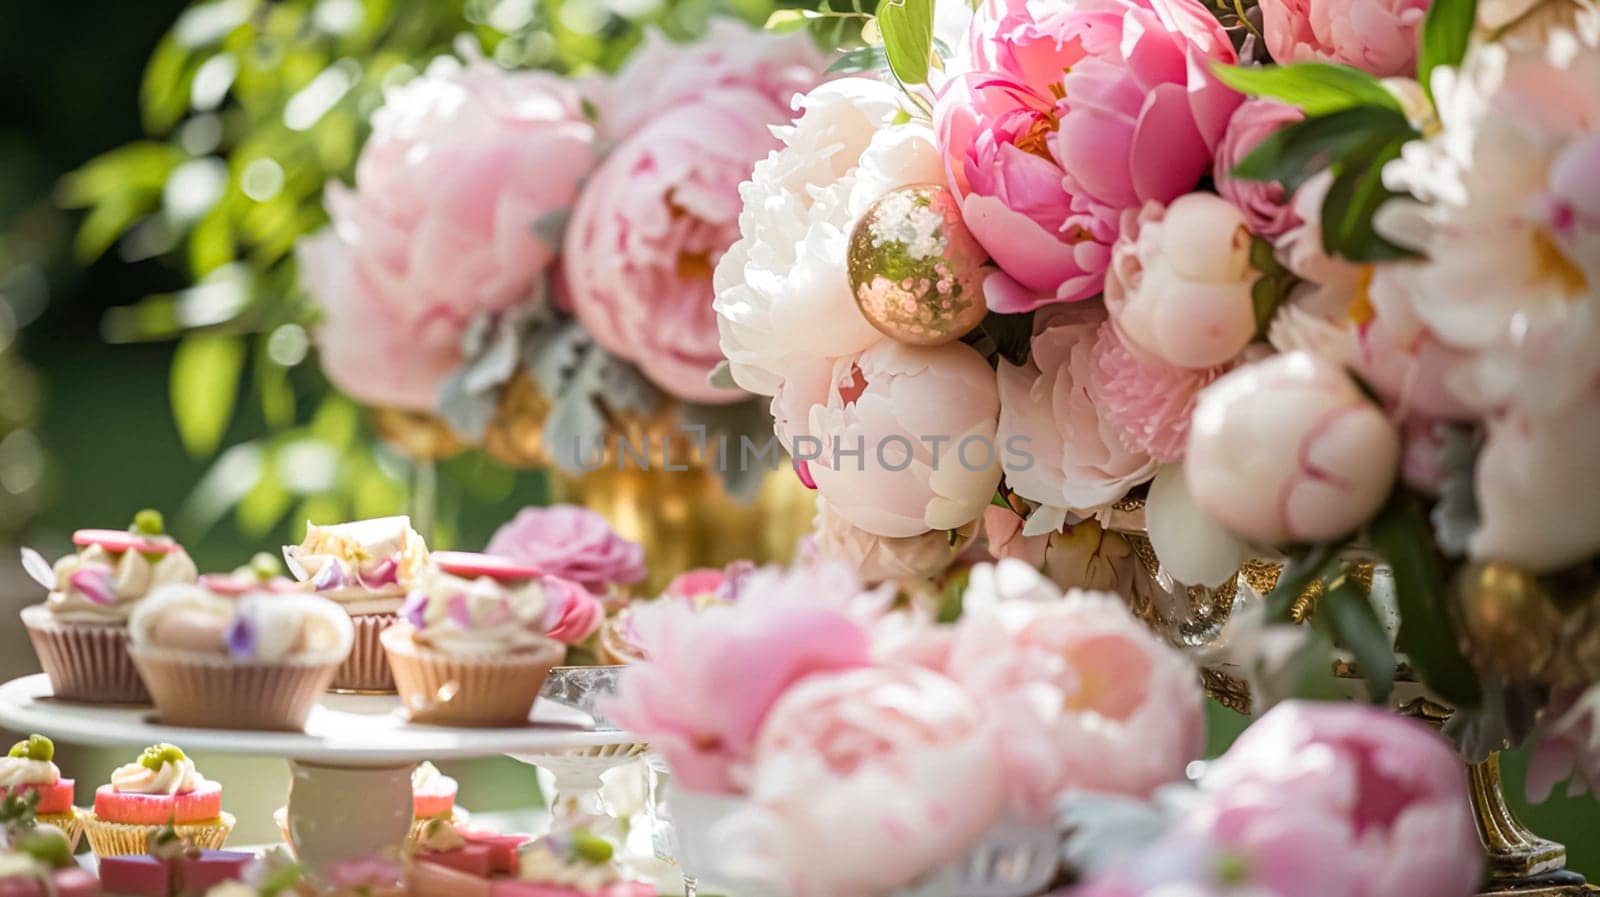 Wedding decoration with peonies, floral decor and event celebration, peony flowers and wedding ceremony in the garden, English country style